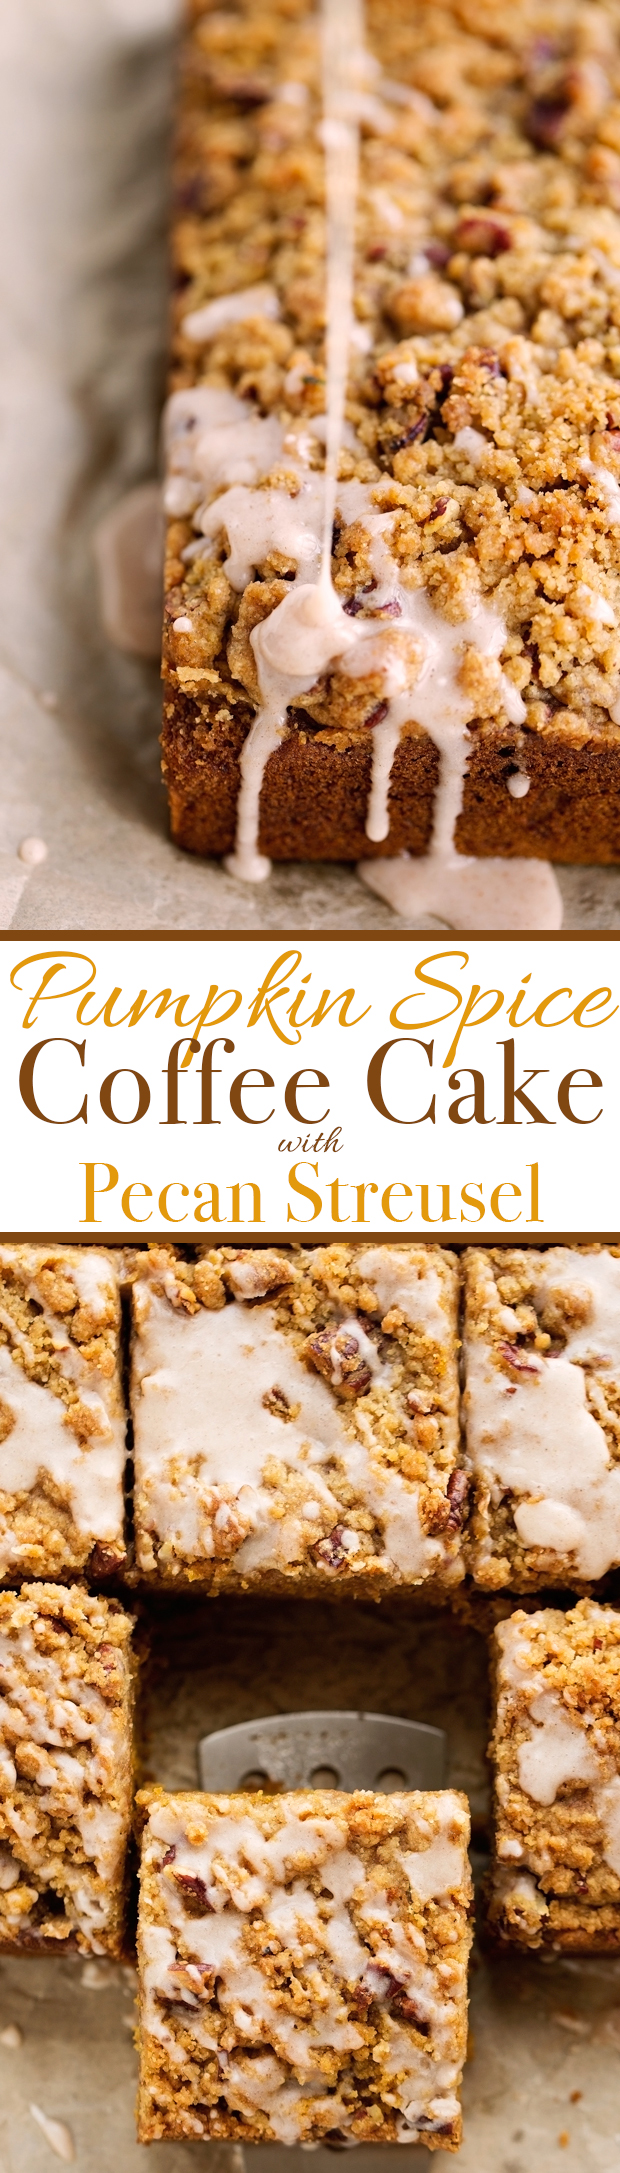 Pumpkin Coffee Cake with Pecan Streusel Topping - Loaded with sweet pumpkin spice, lightly sweeter but so moist! #pumpkin #coffeecake #pumpkincake | Littlespicejar.com